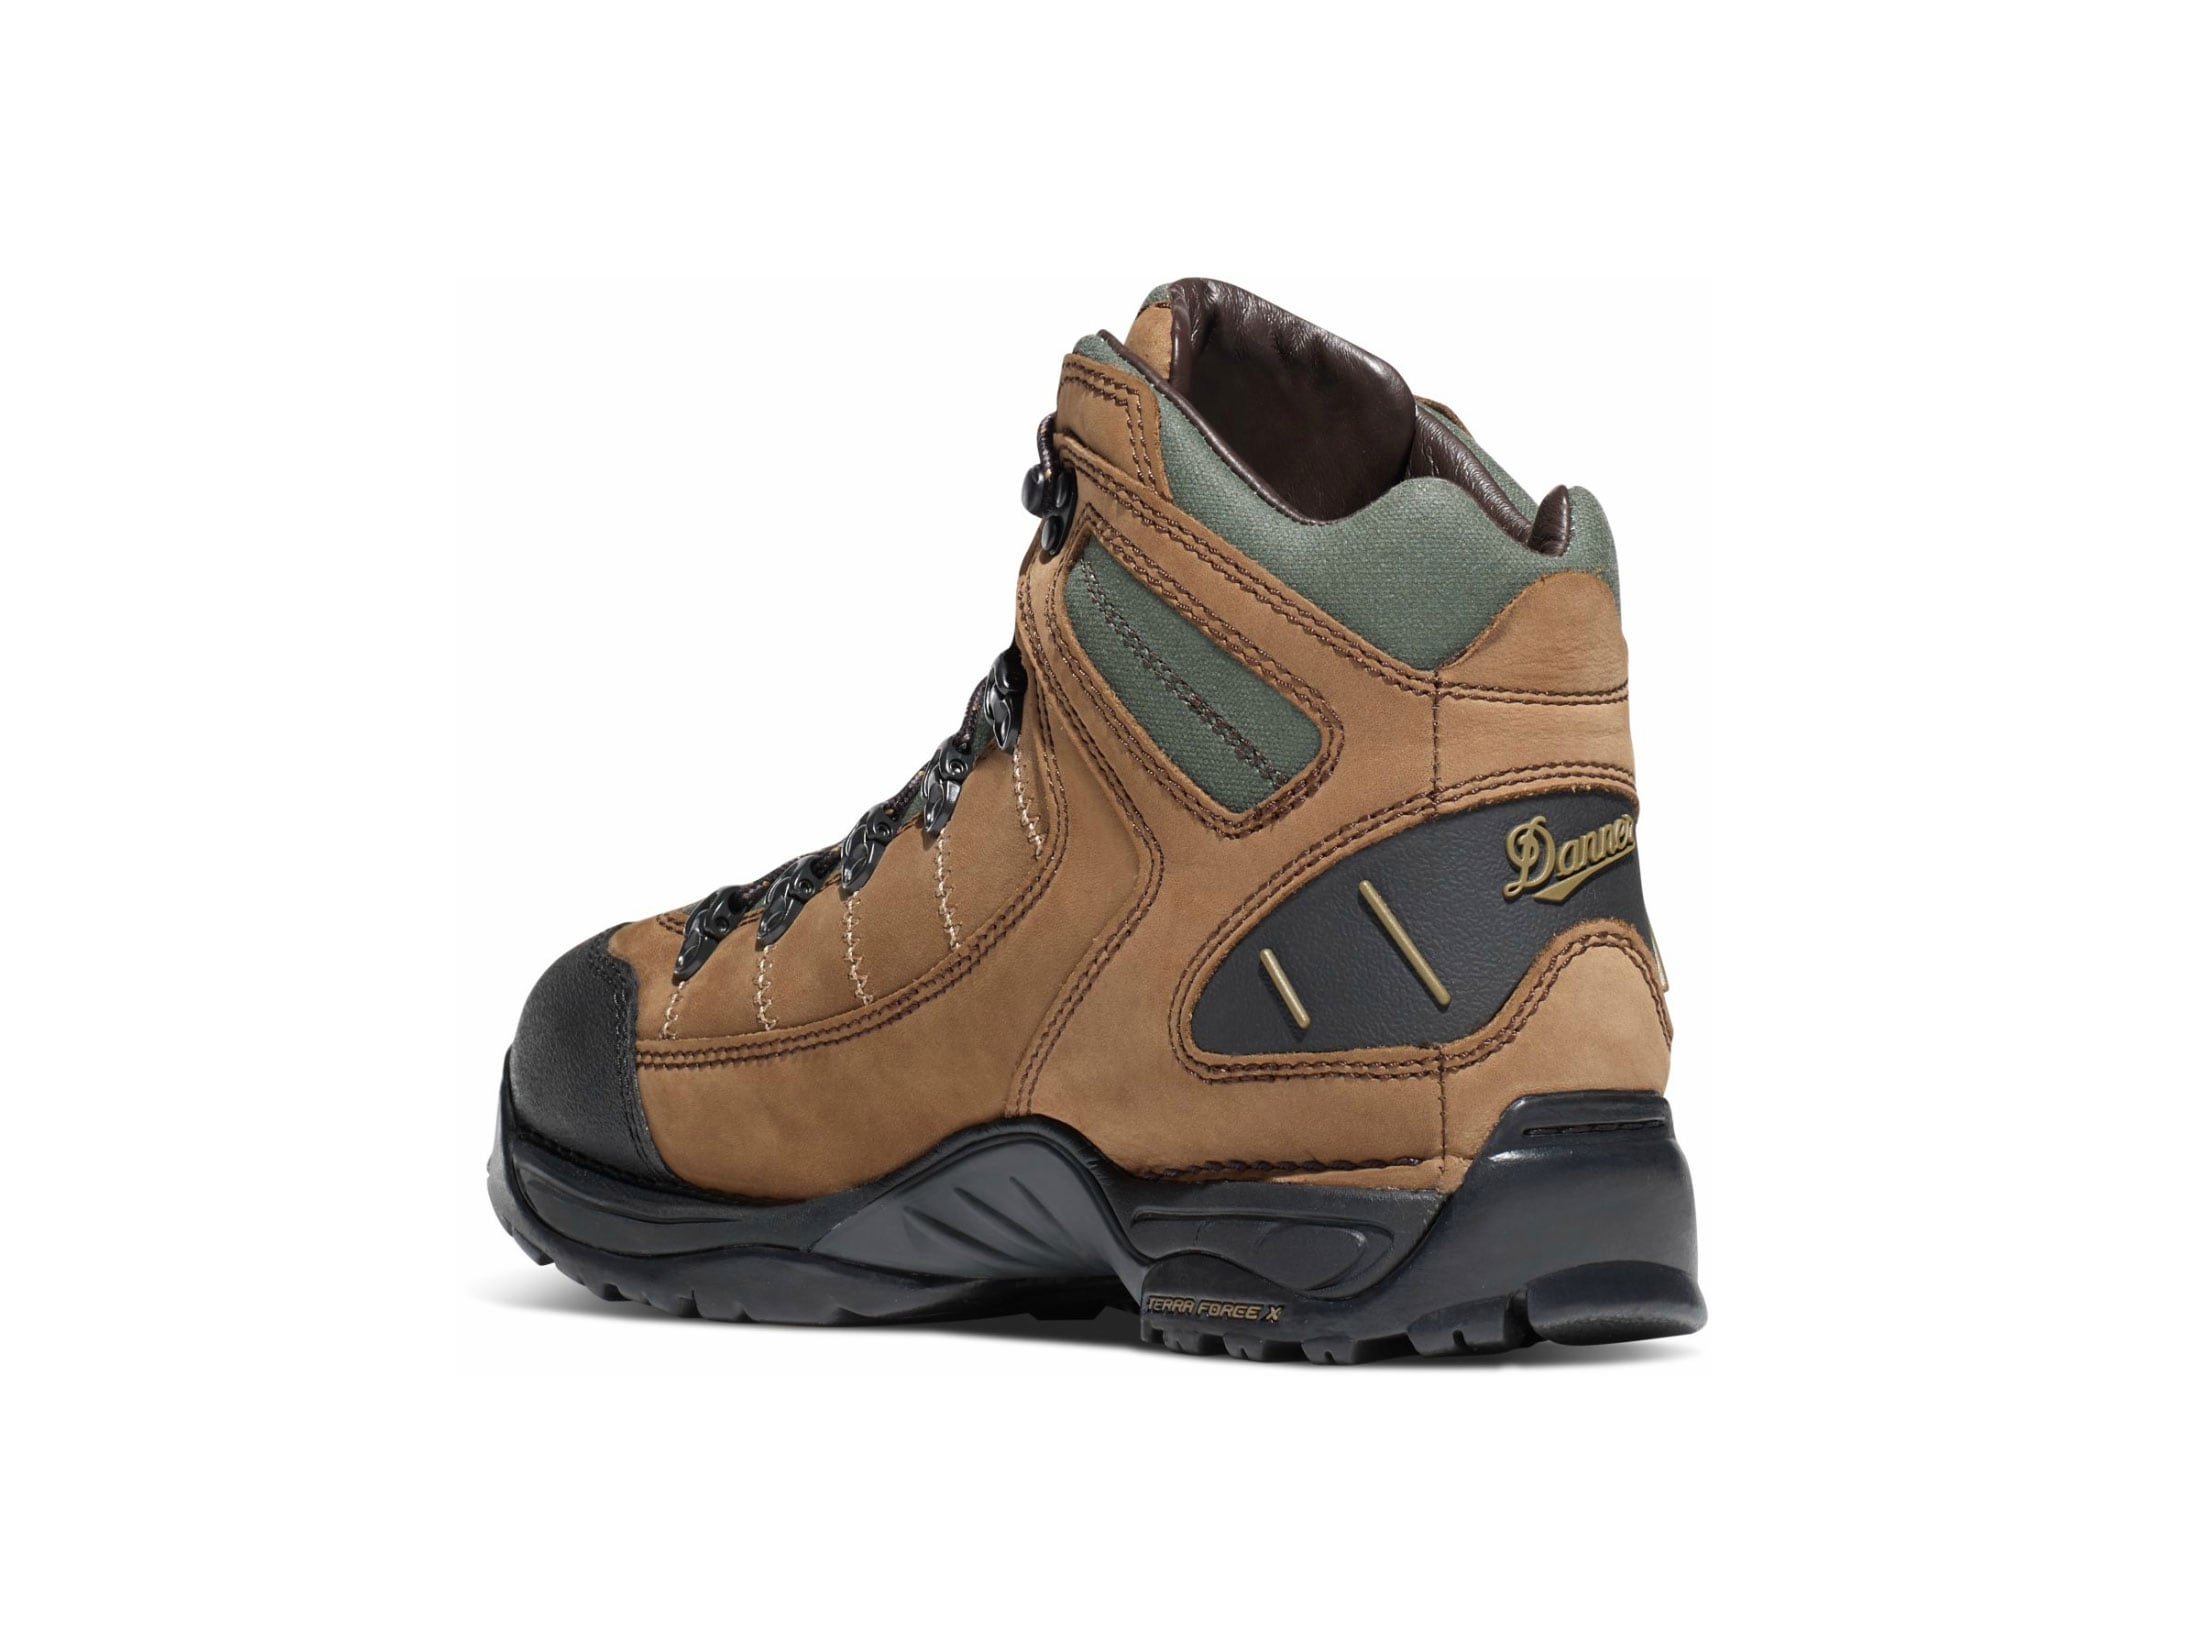 Danner 453 5.5 GORE-TEX Hiking Boots 